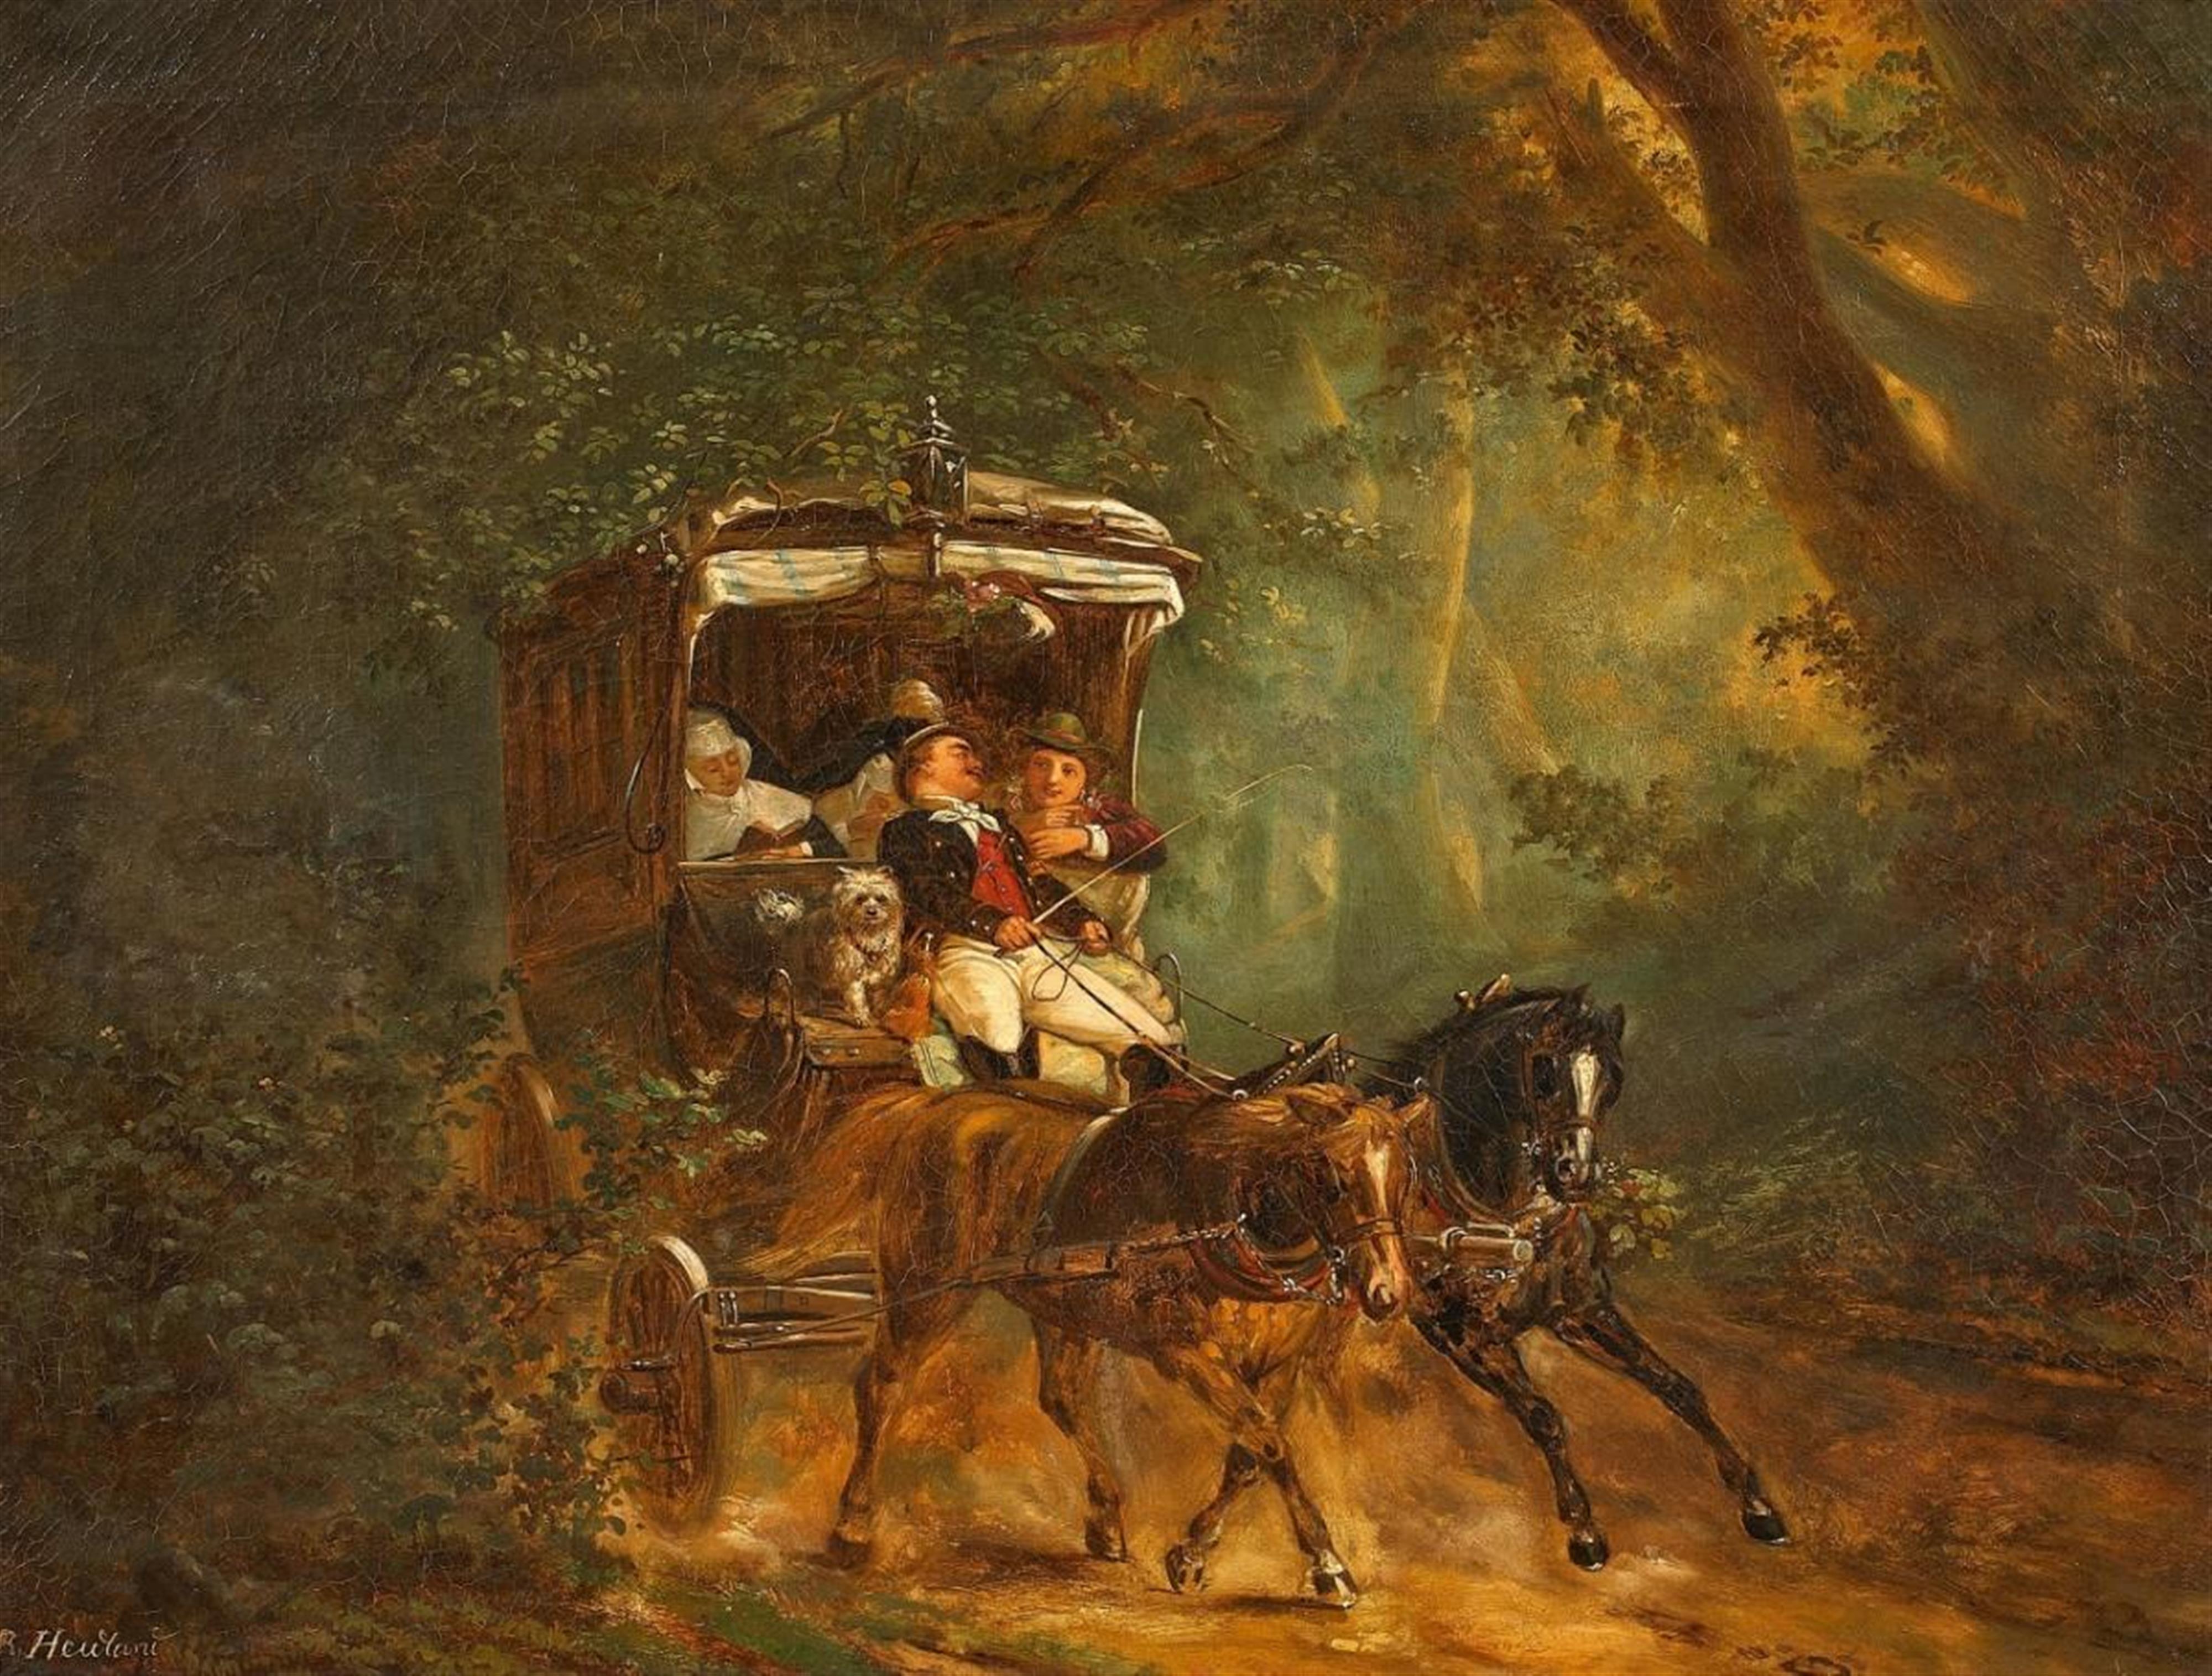 B. Heidland - THE STAGE COACH IN THE FOREST - image-1